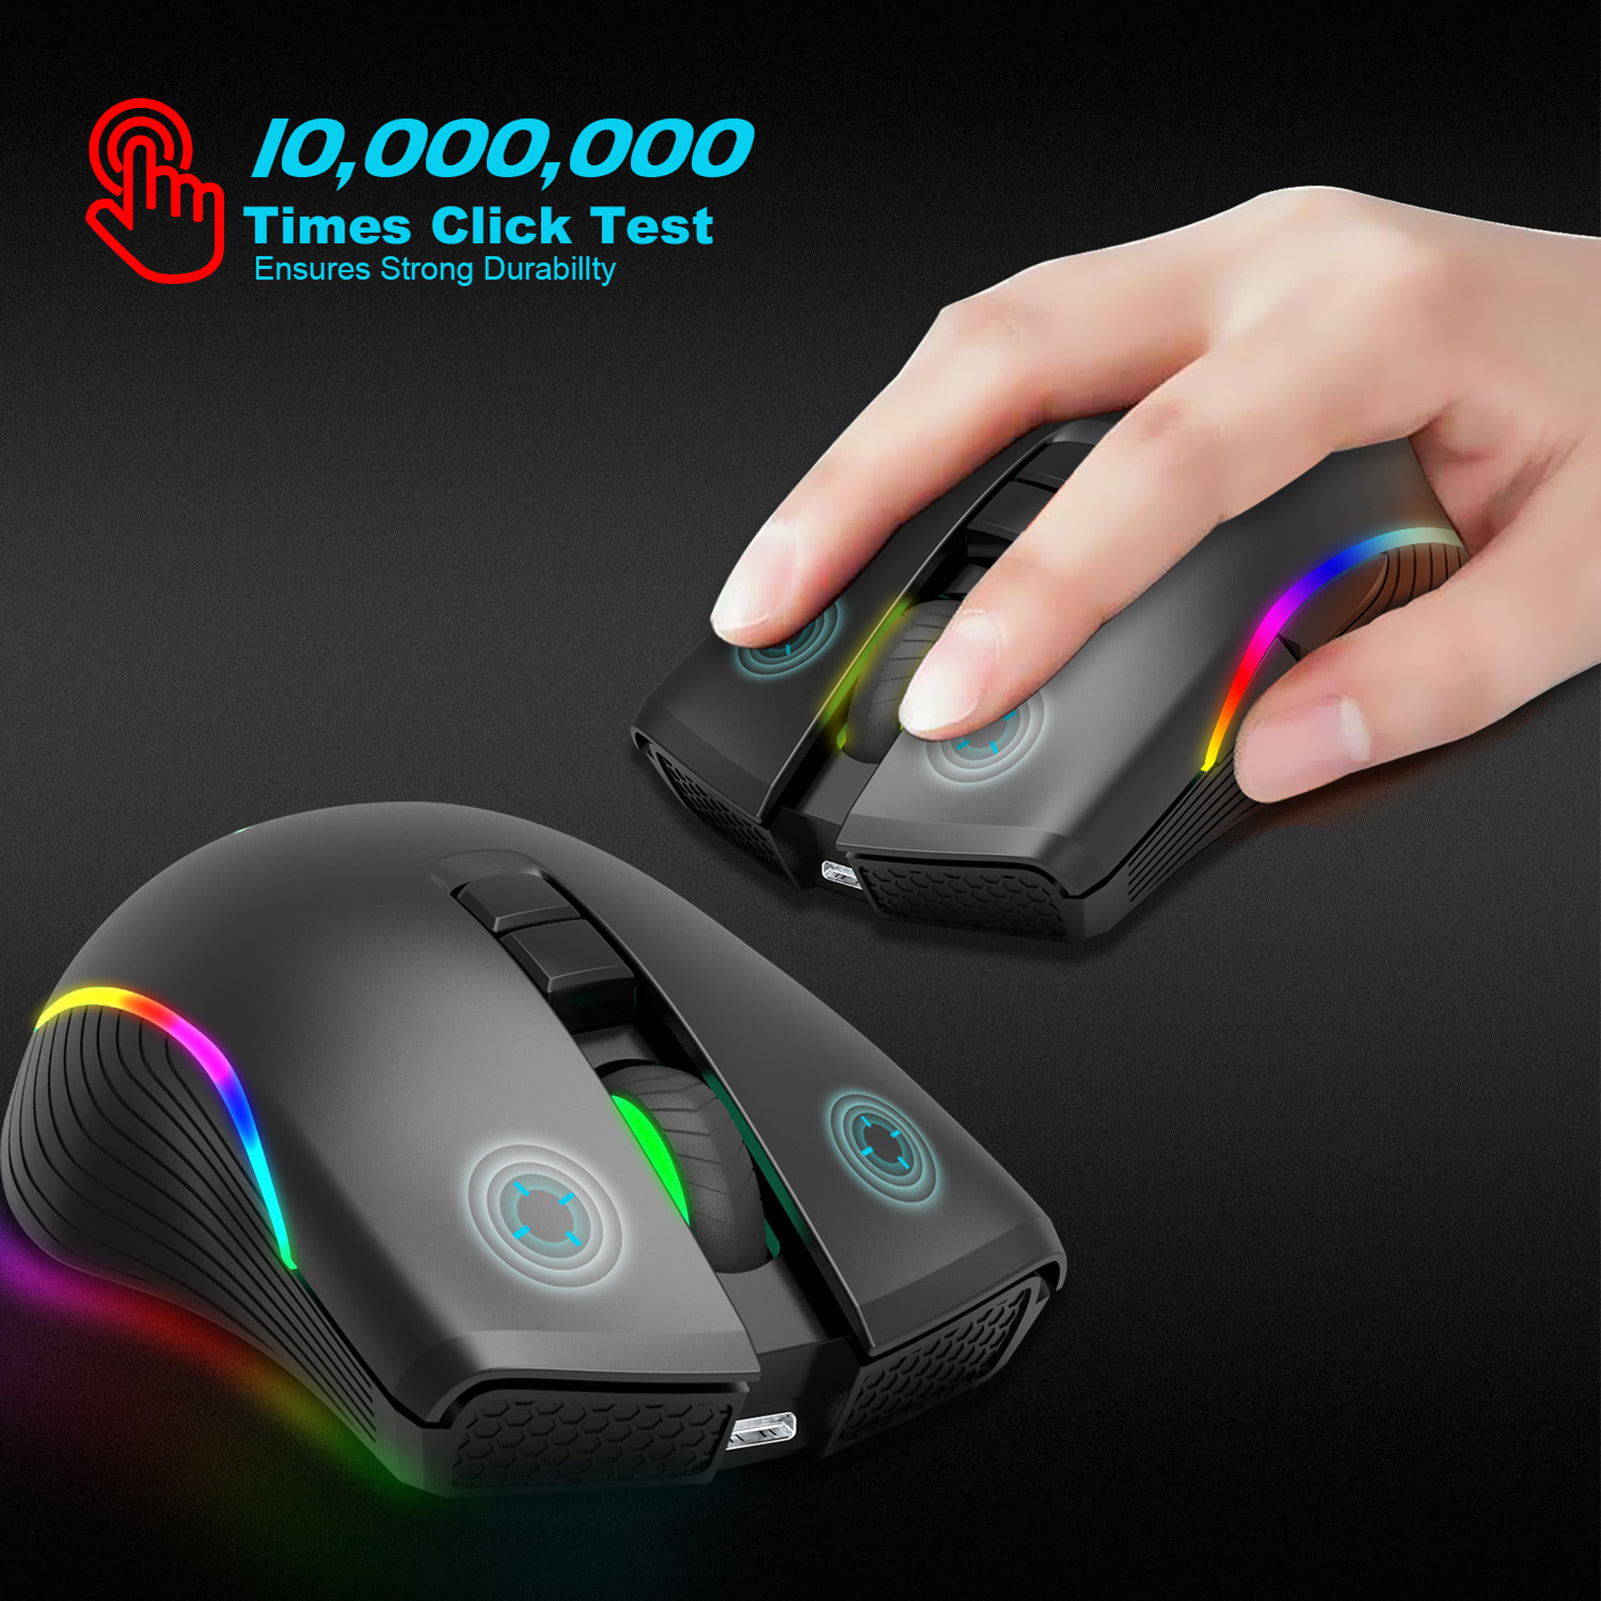 HXSJ T26 Mouse Wireless Mice 2.4GHz Type C Rechargeable Backlit 7 Buttons Portable Mini Gaming Mouse for Mac Laptop PC Computer